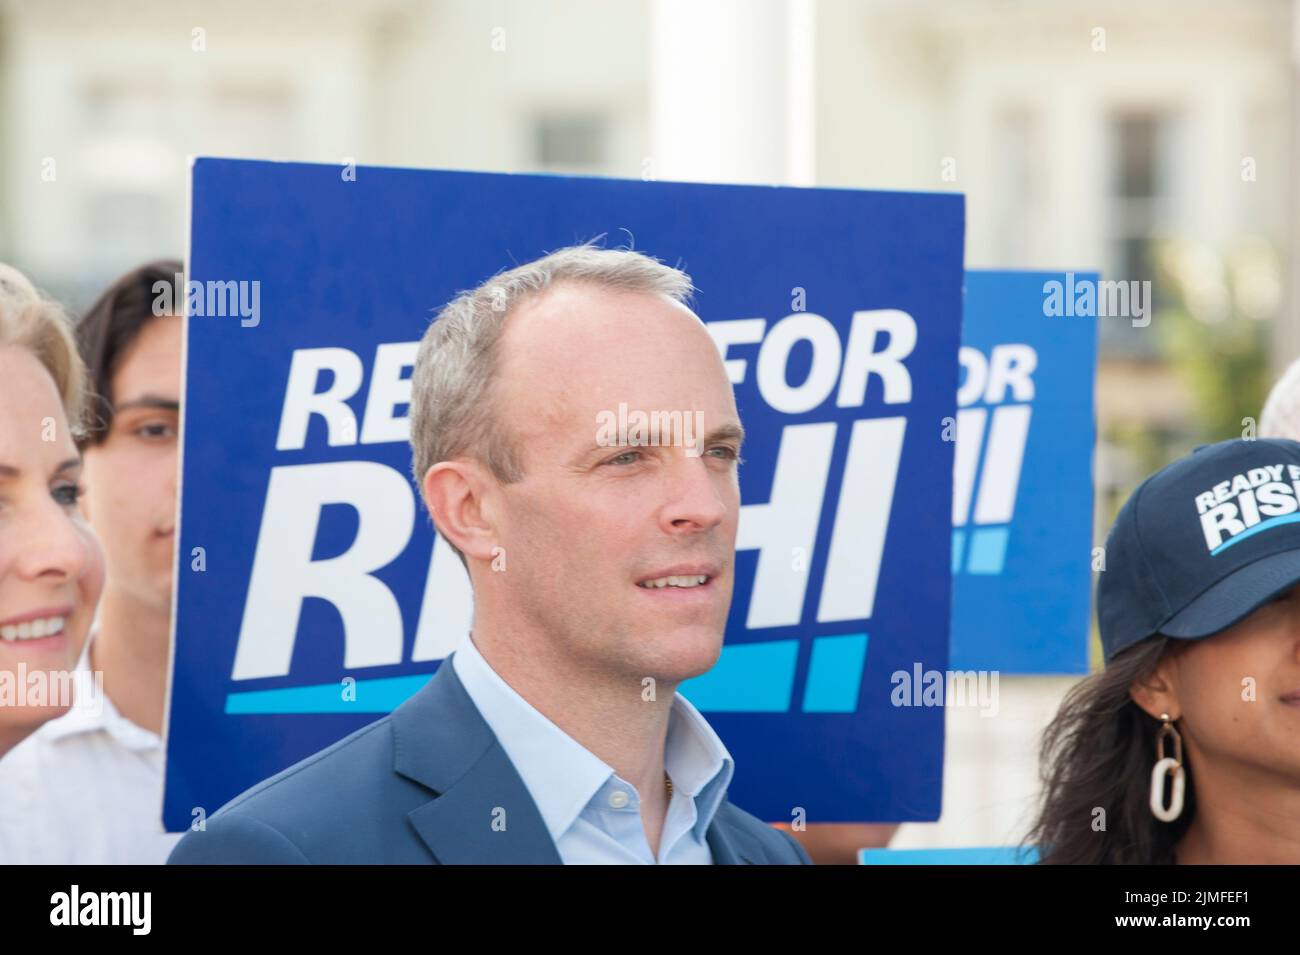 Dominic Raab, Deputy Prime Minister, MP for Esher and Walton arrives in Eastbourne to support Rishi Sunak MP as candidate campaigning to replace Boris Johnson as Party Leader and Prime Minister. Stock Photo